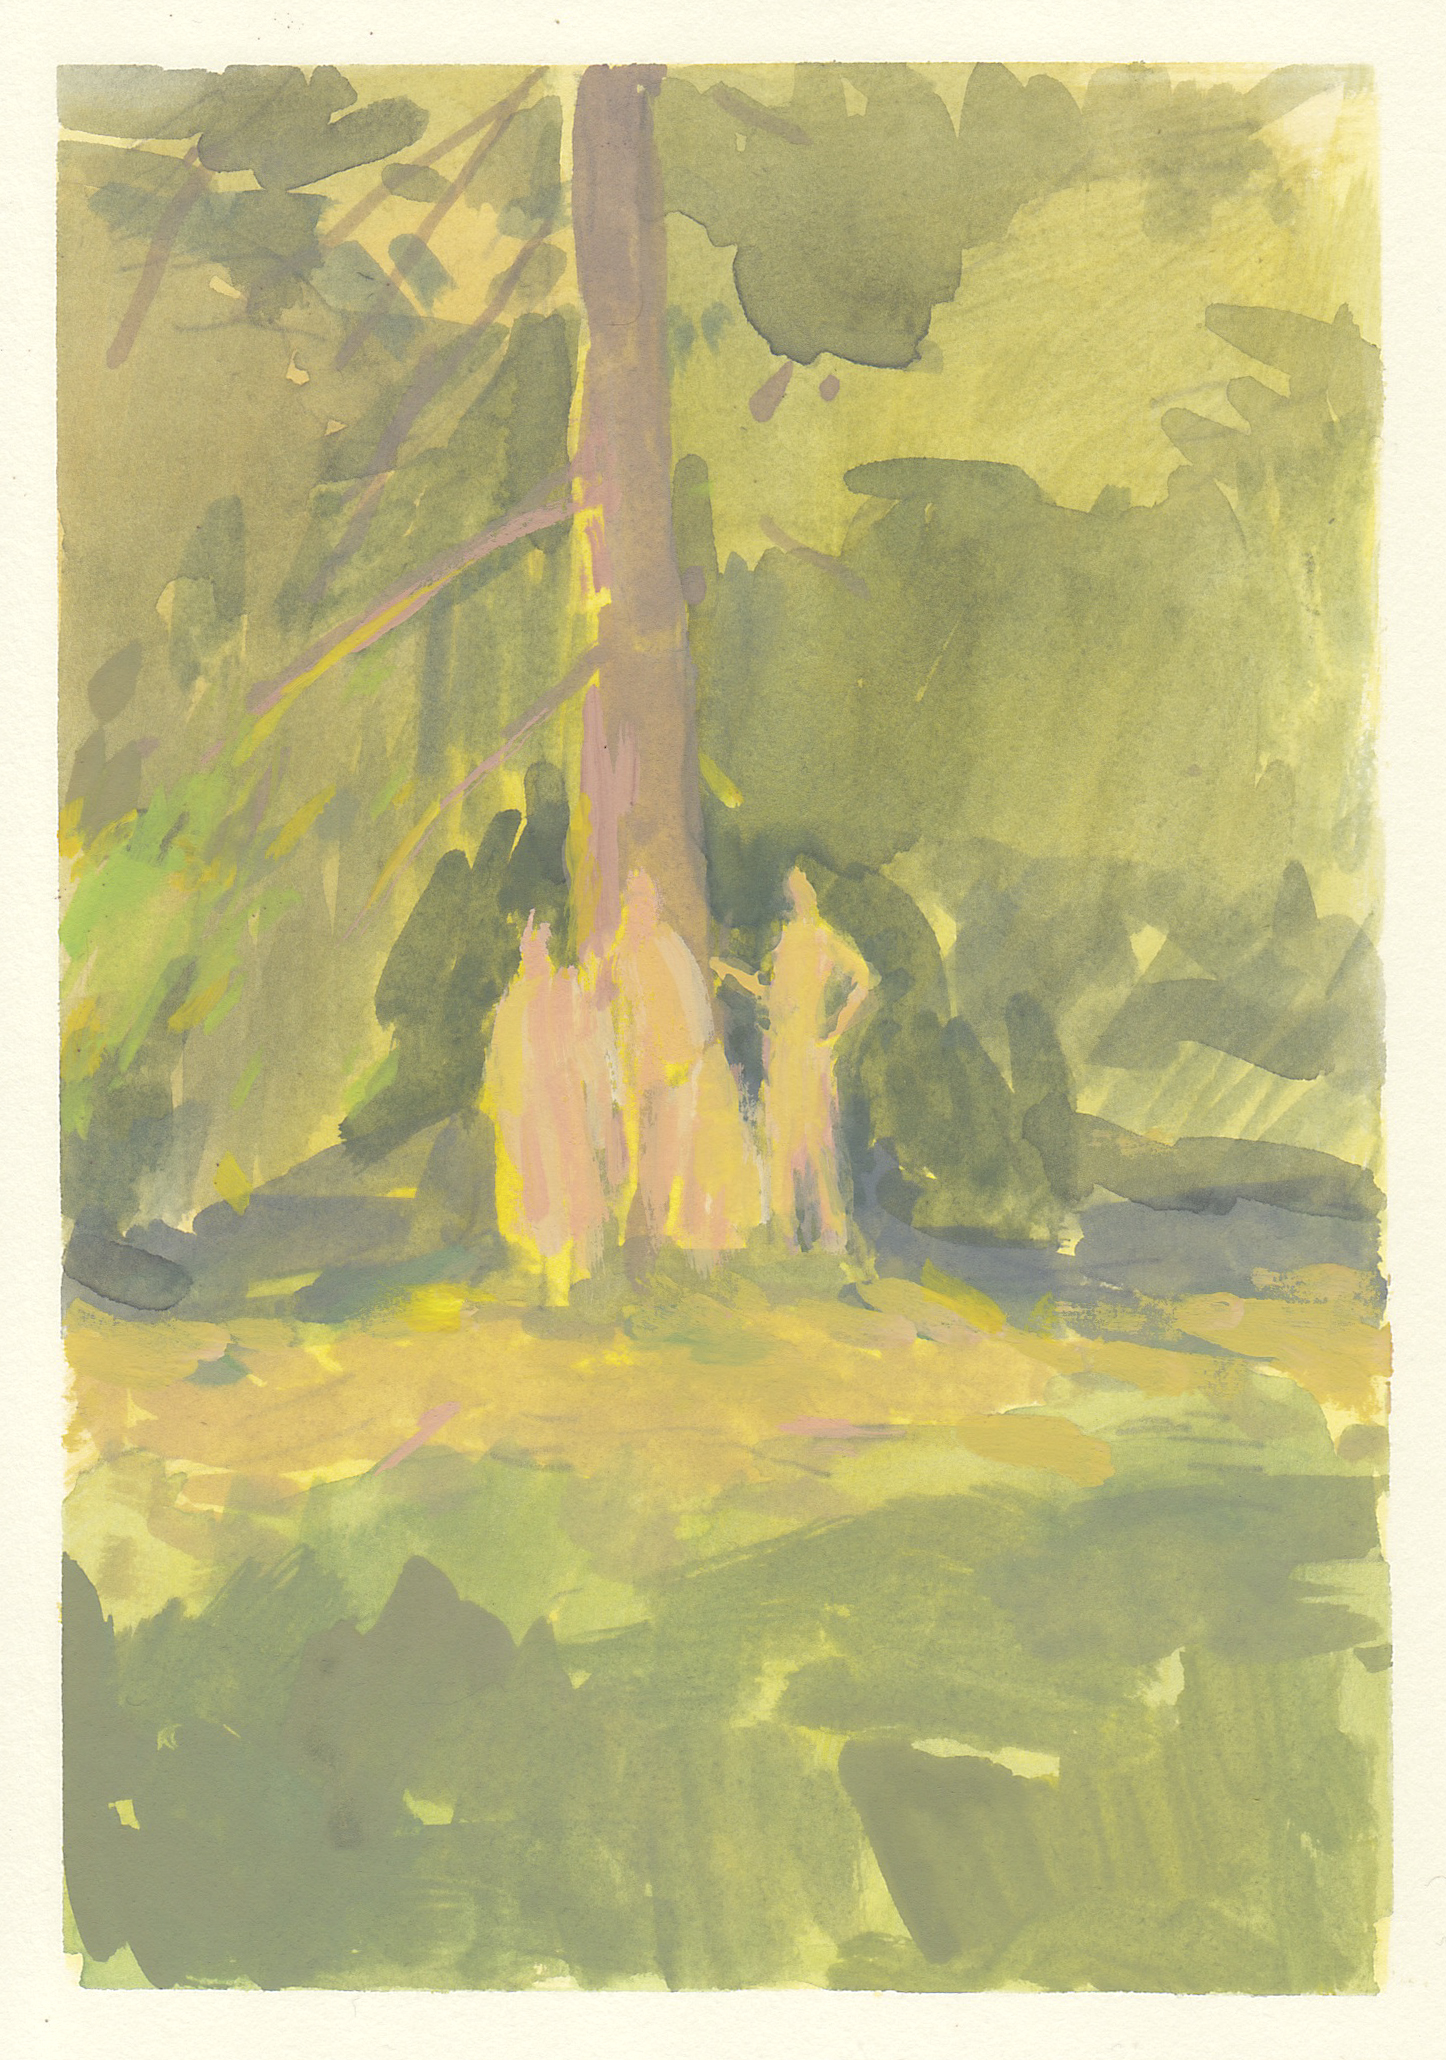    pines people     gouache on paper 4.5x6.5" 2018   purchase  